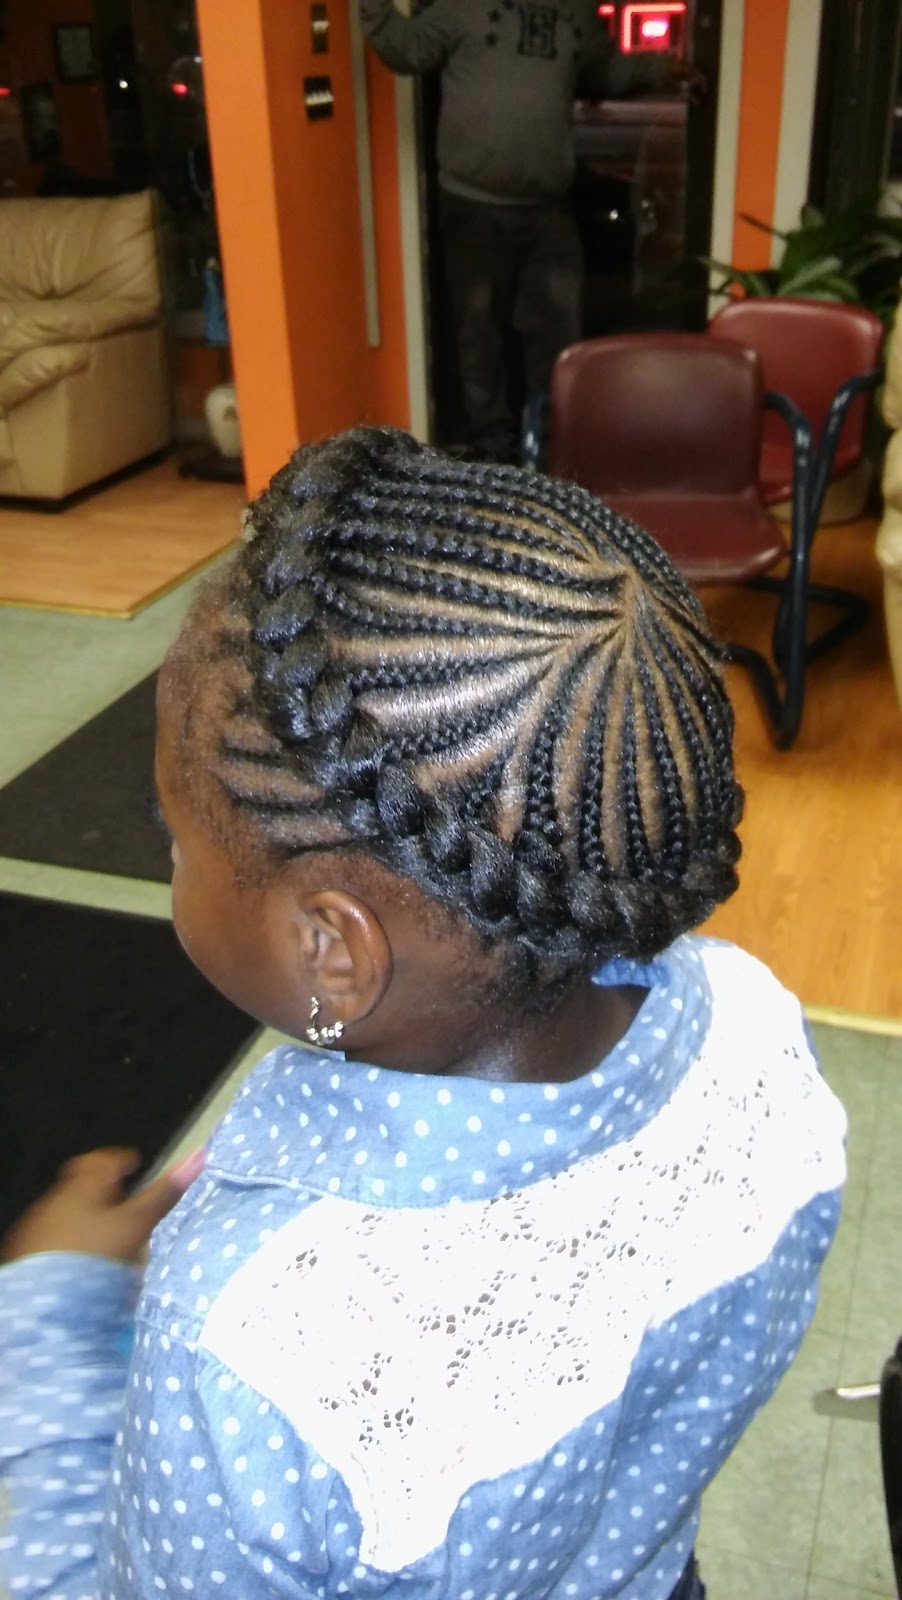 Jennys Beauty Salon | 530 Whalley Ave, New Haven, CT 06511 | Phone: (203) 389-8767